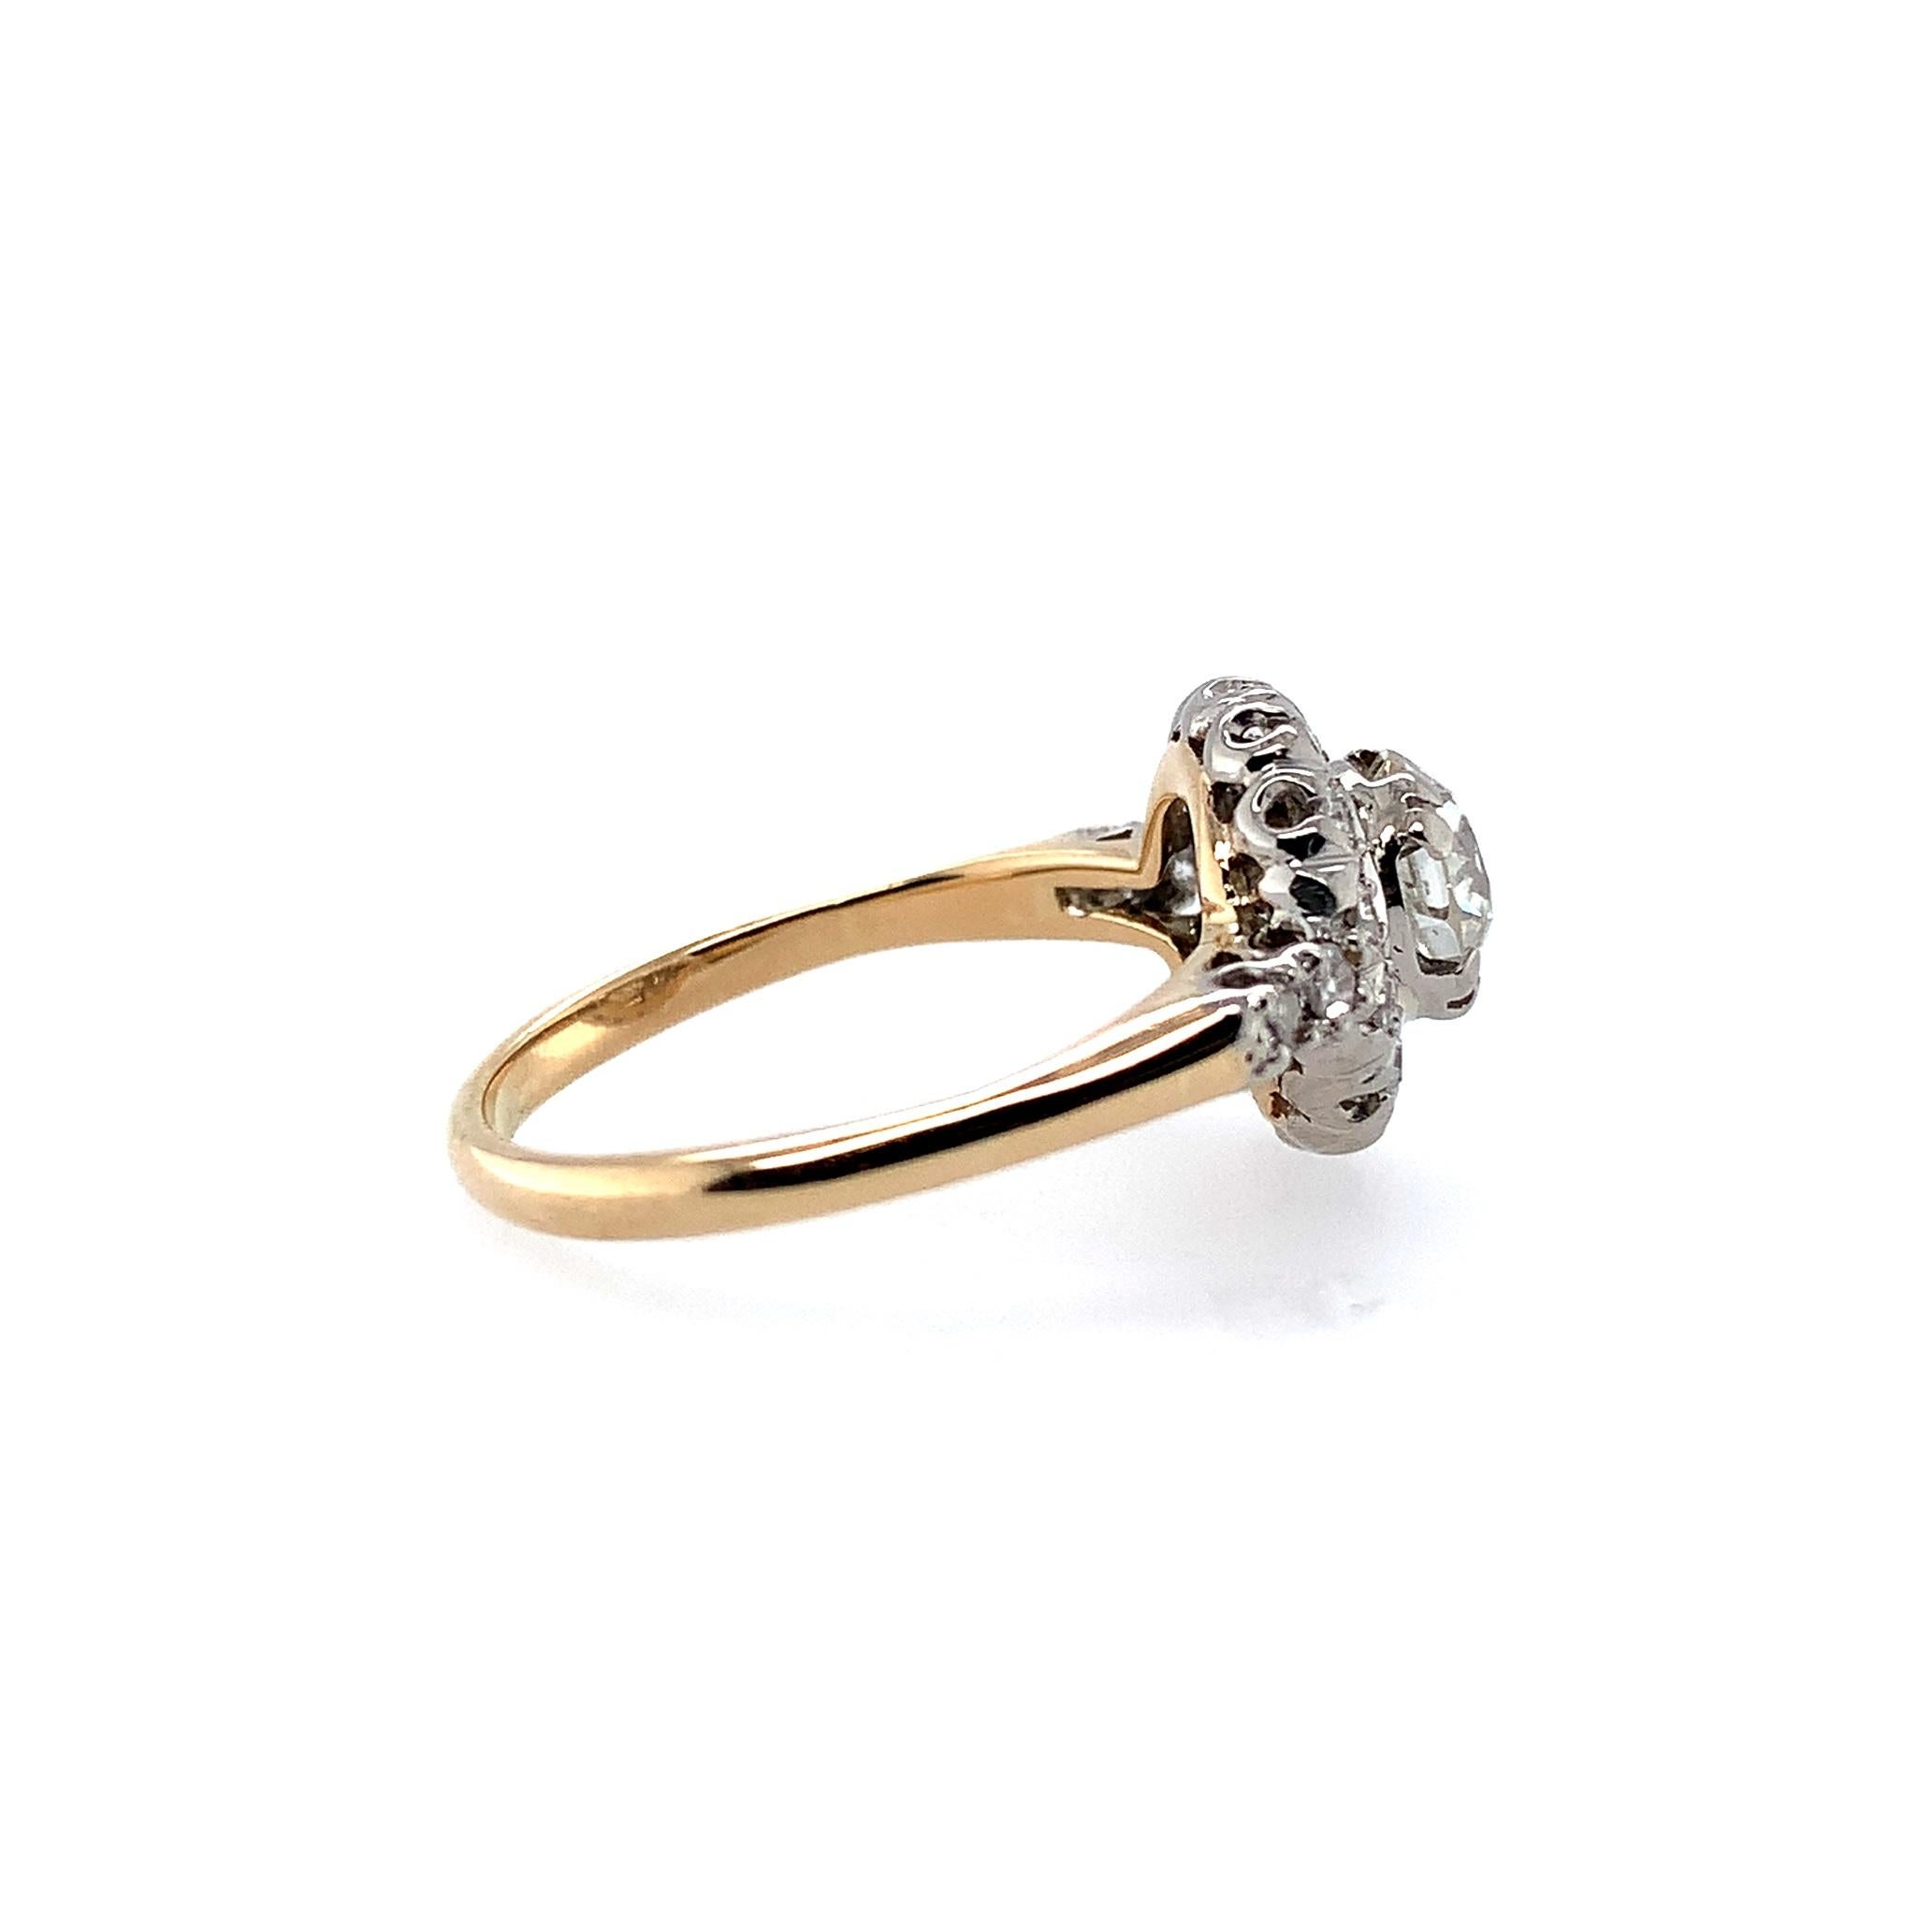 14k yellow gold antique diamond ring with about 1.15 carats total weight of antique diamonds set in a white gold top. The center European cut diamond measures about 5.98mm and weighs about .91cts. The 18 surrounding single cut diamonds measure about